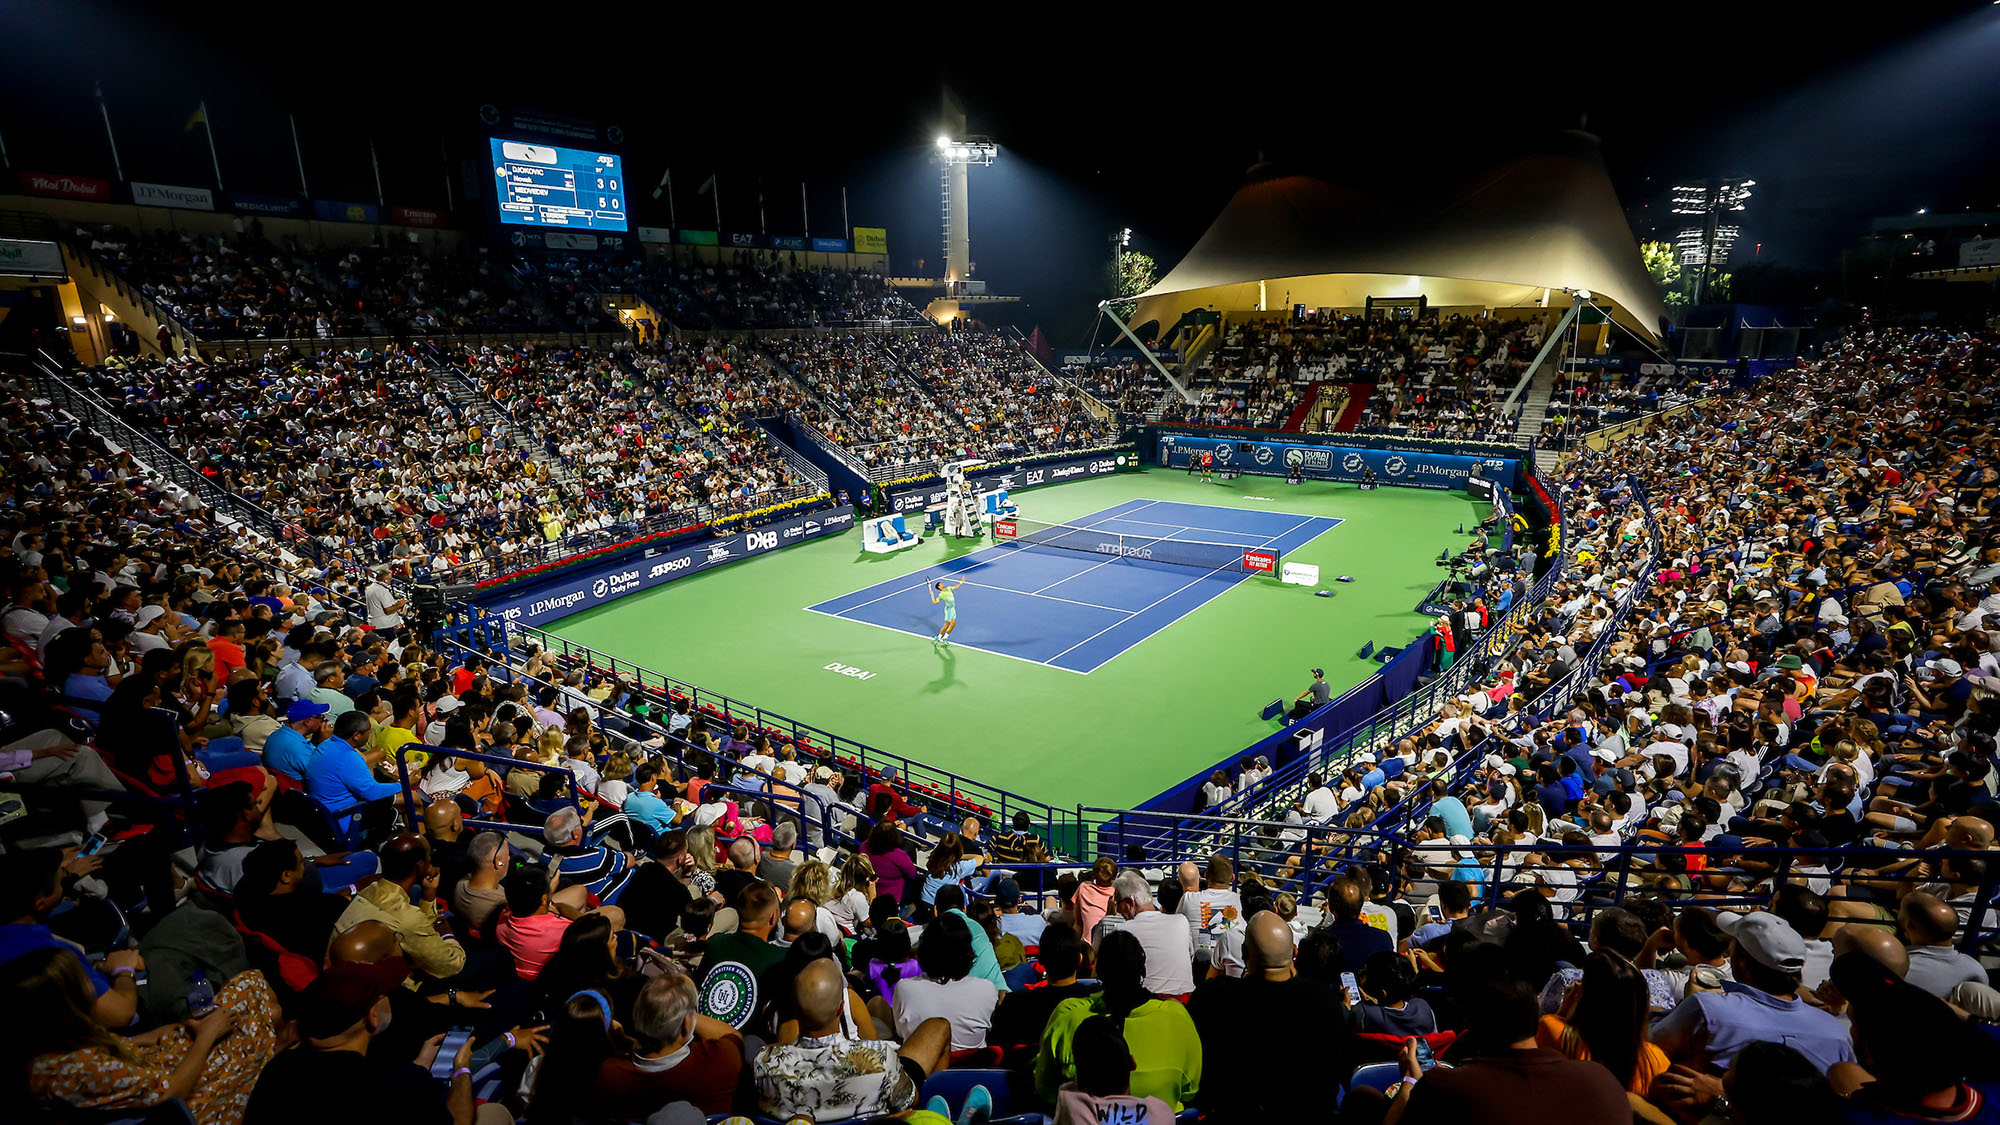 Dubai Duty Free Tennis Stadium filled with fans for the 2023 men's semifinal between Andrey Rublev and Alexander Zverev